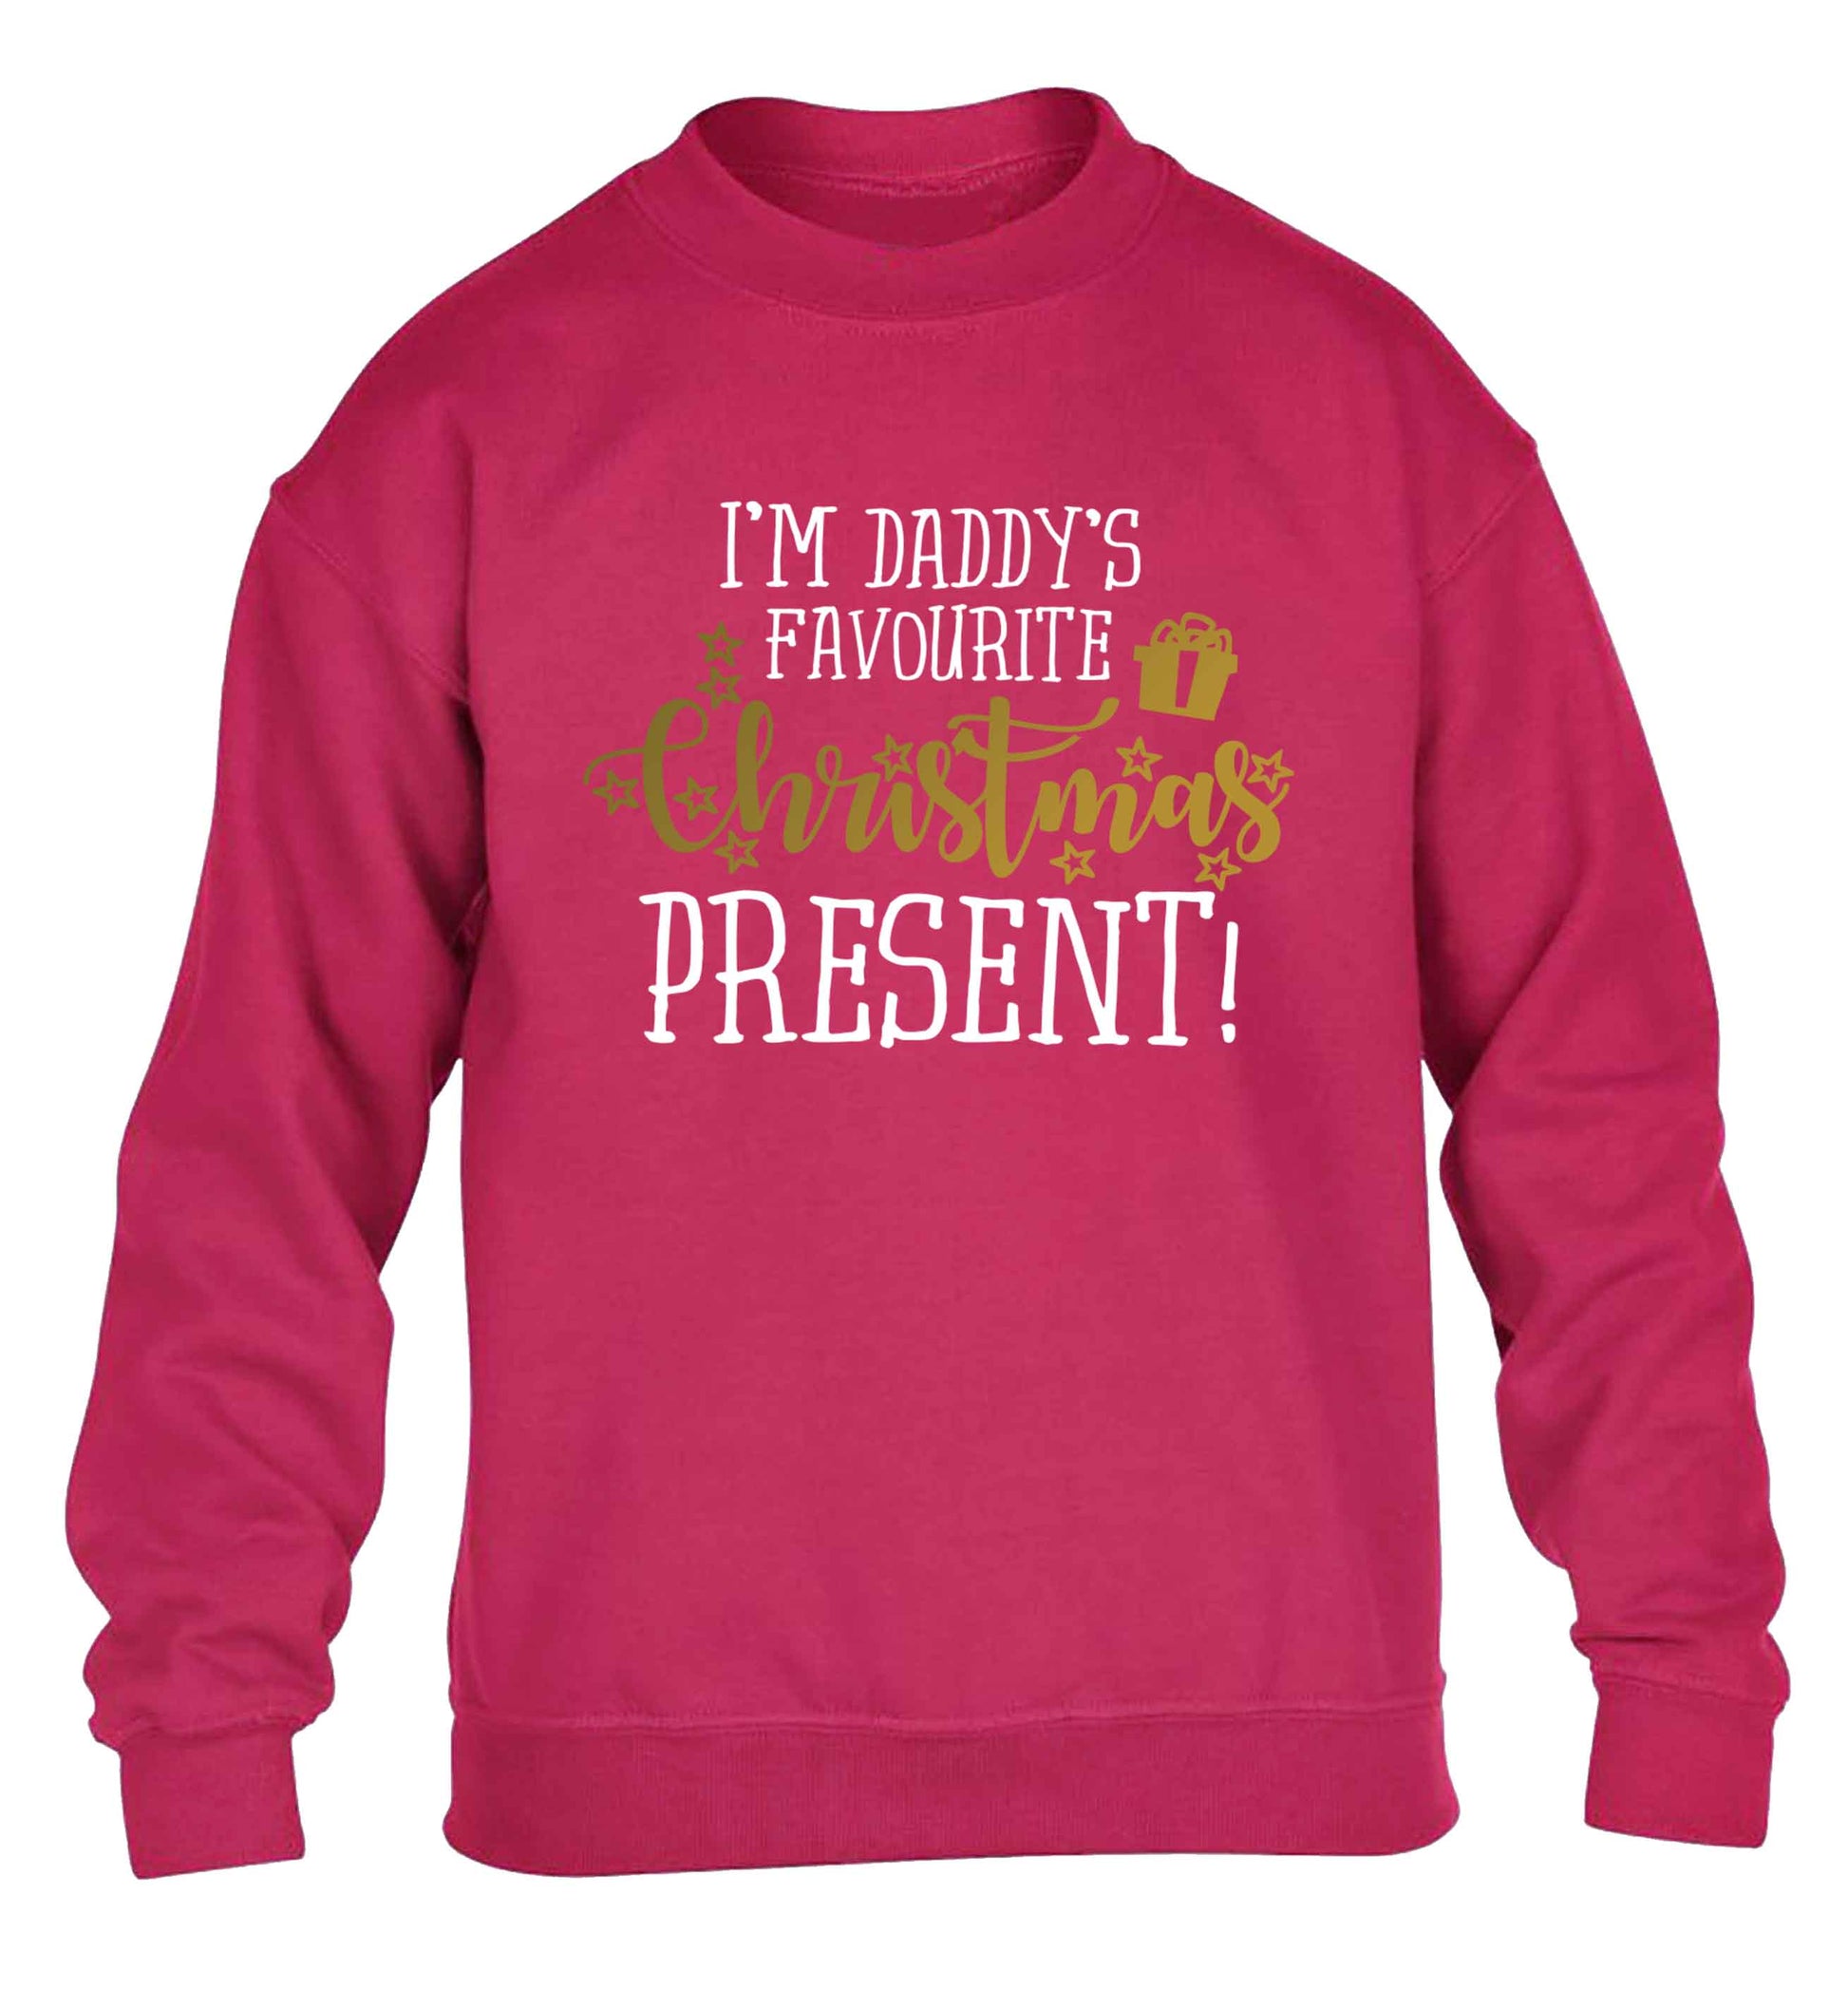 Daddy's favourite Christmas present children's pink sweater 12-13 Years